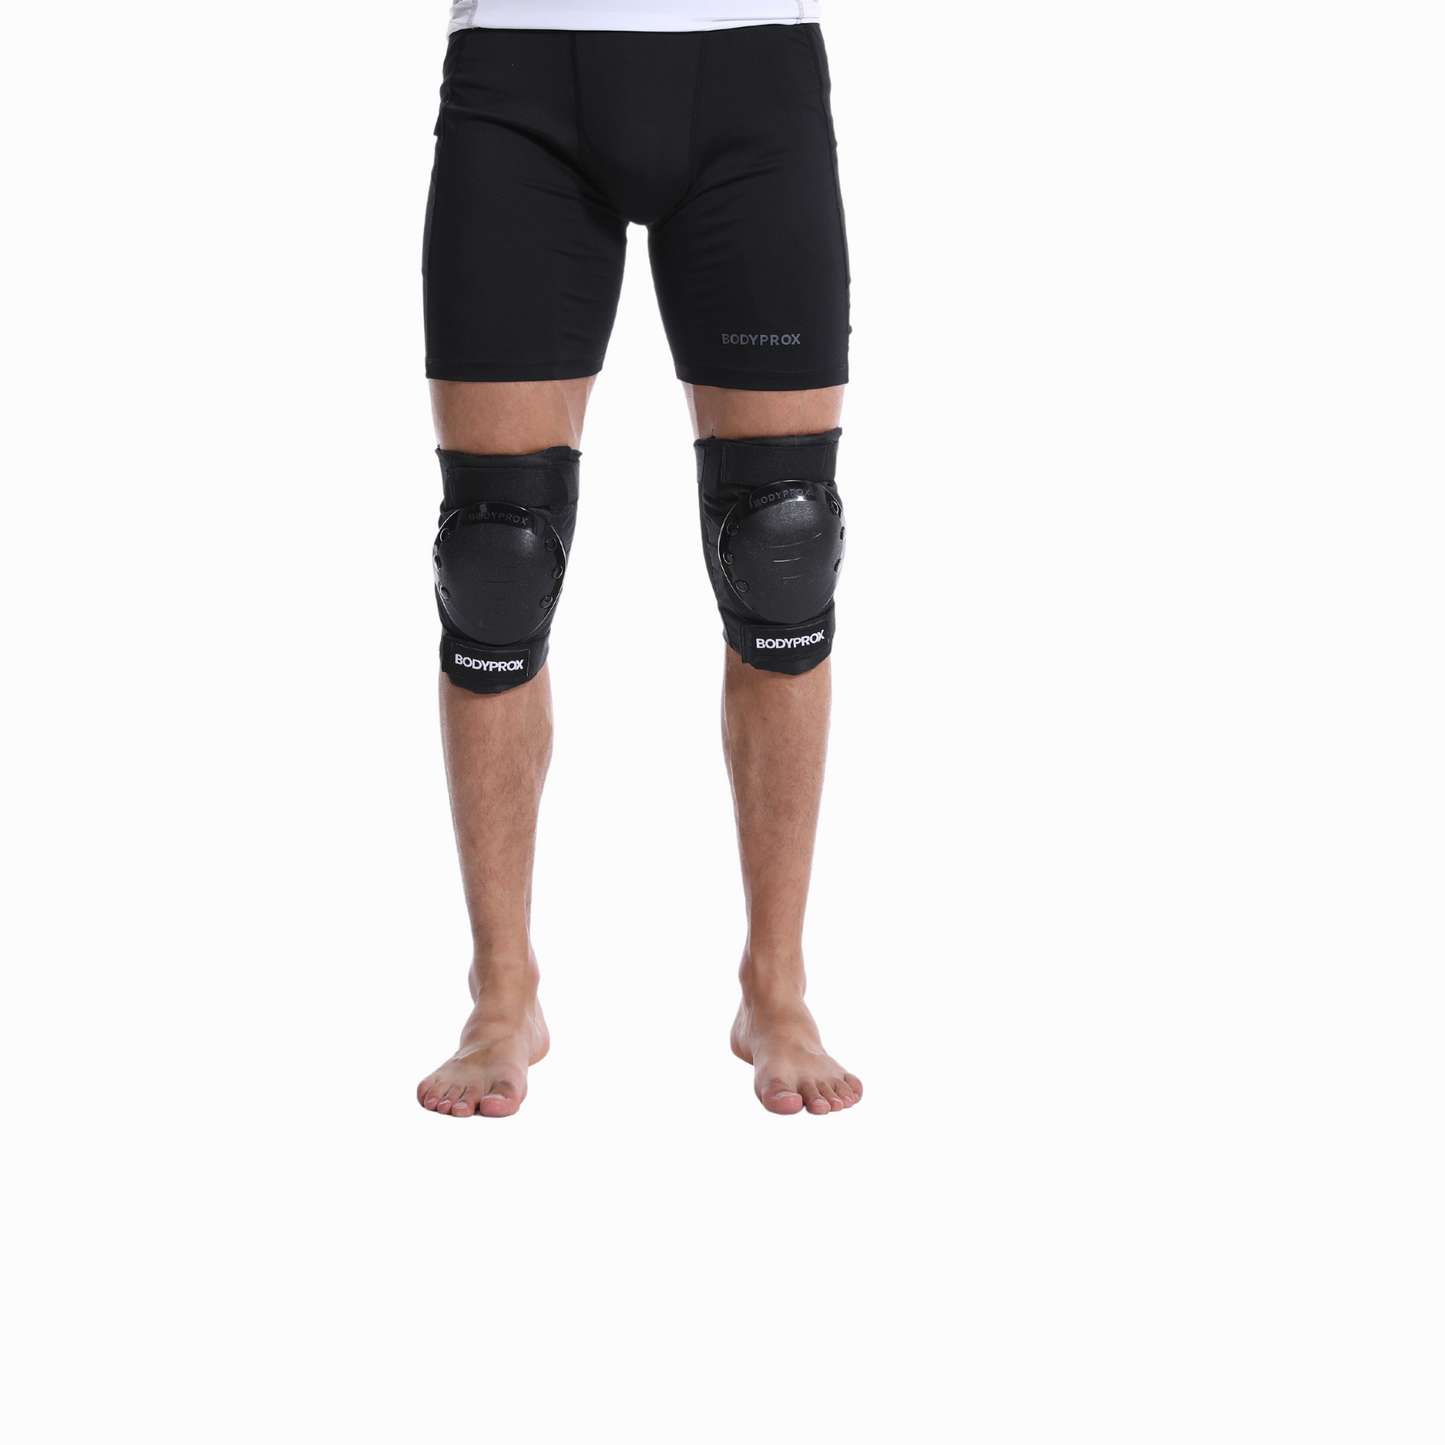 Knee Pads, Elbow Pads, And Wrist Guards Set